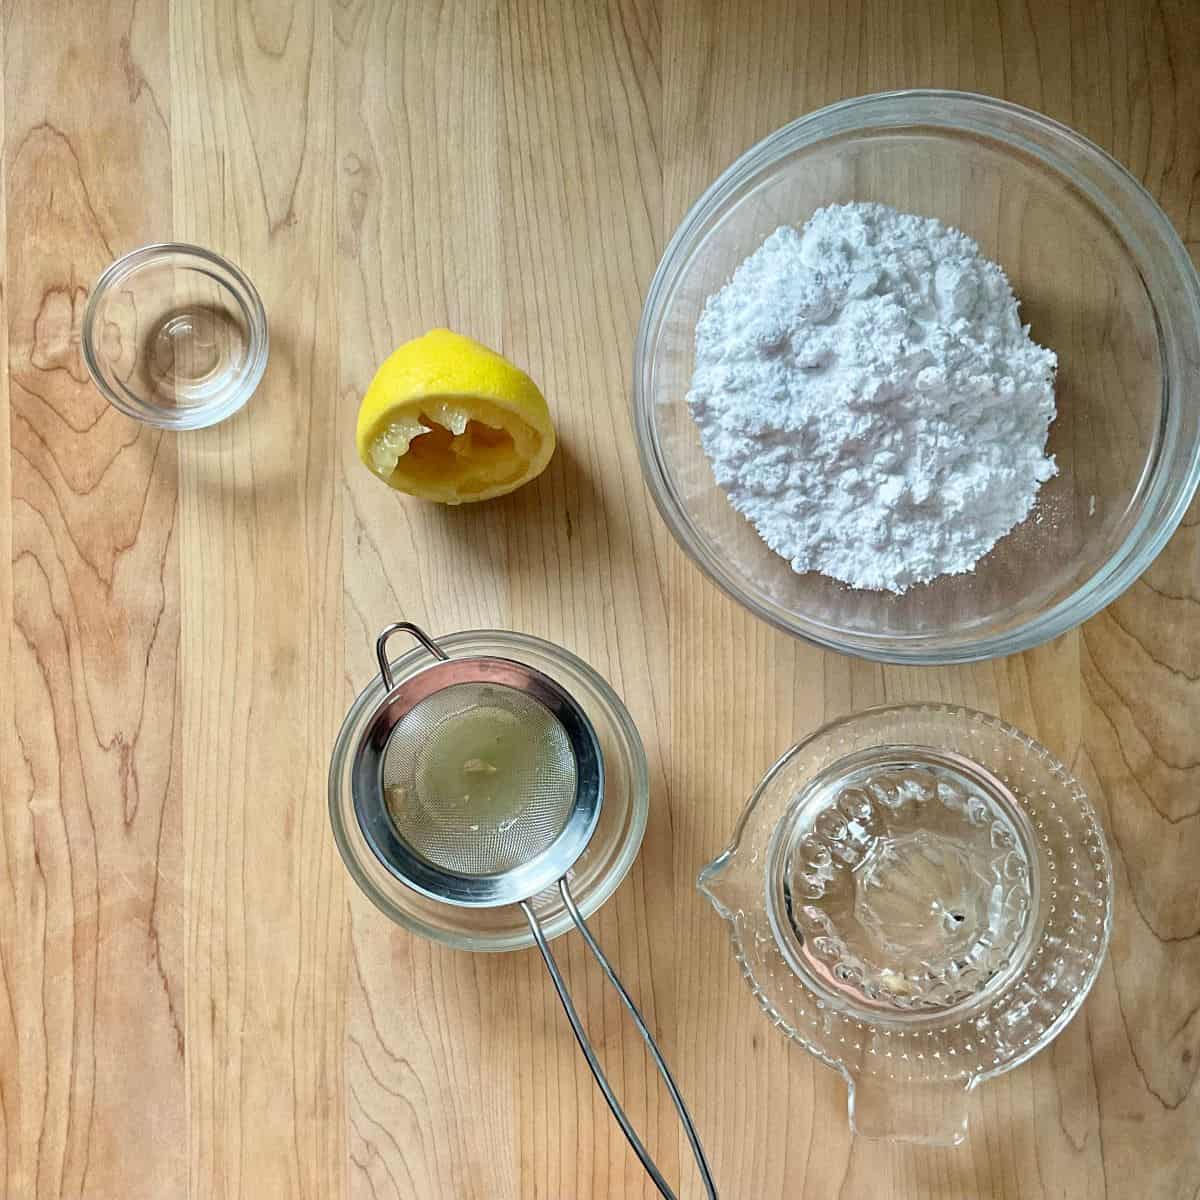 Ingredients to make lemon glaze icing includes sifted icing sugar and sieved lemon juice.